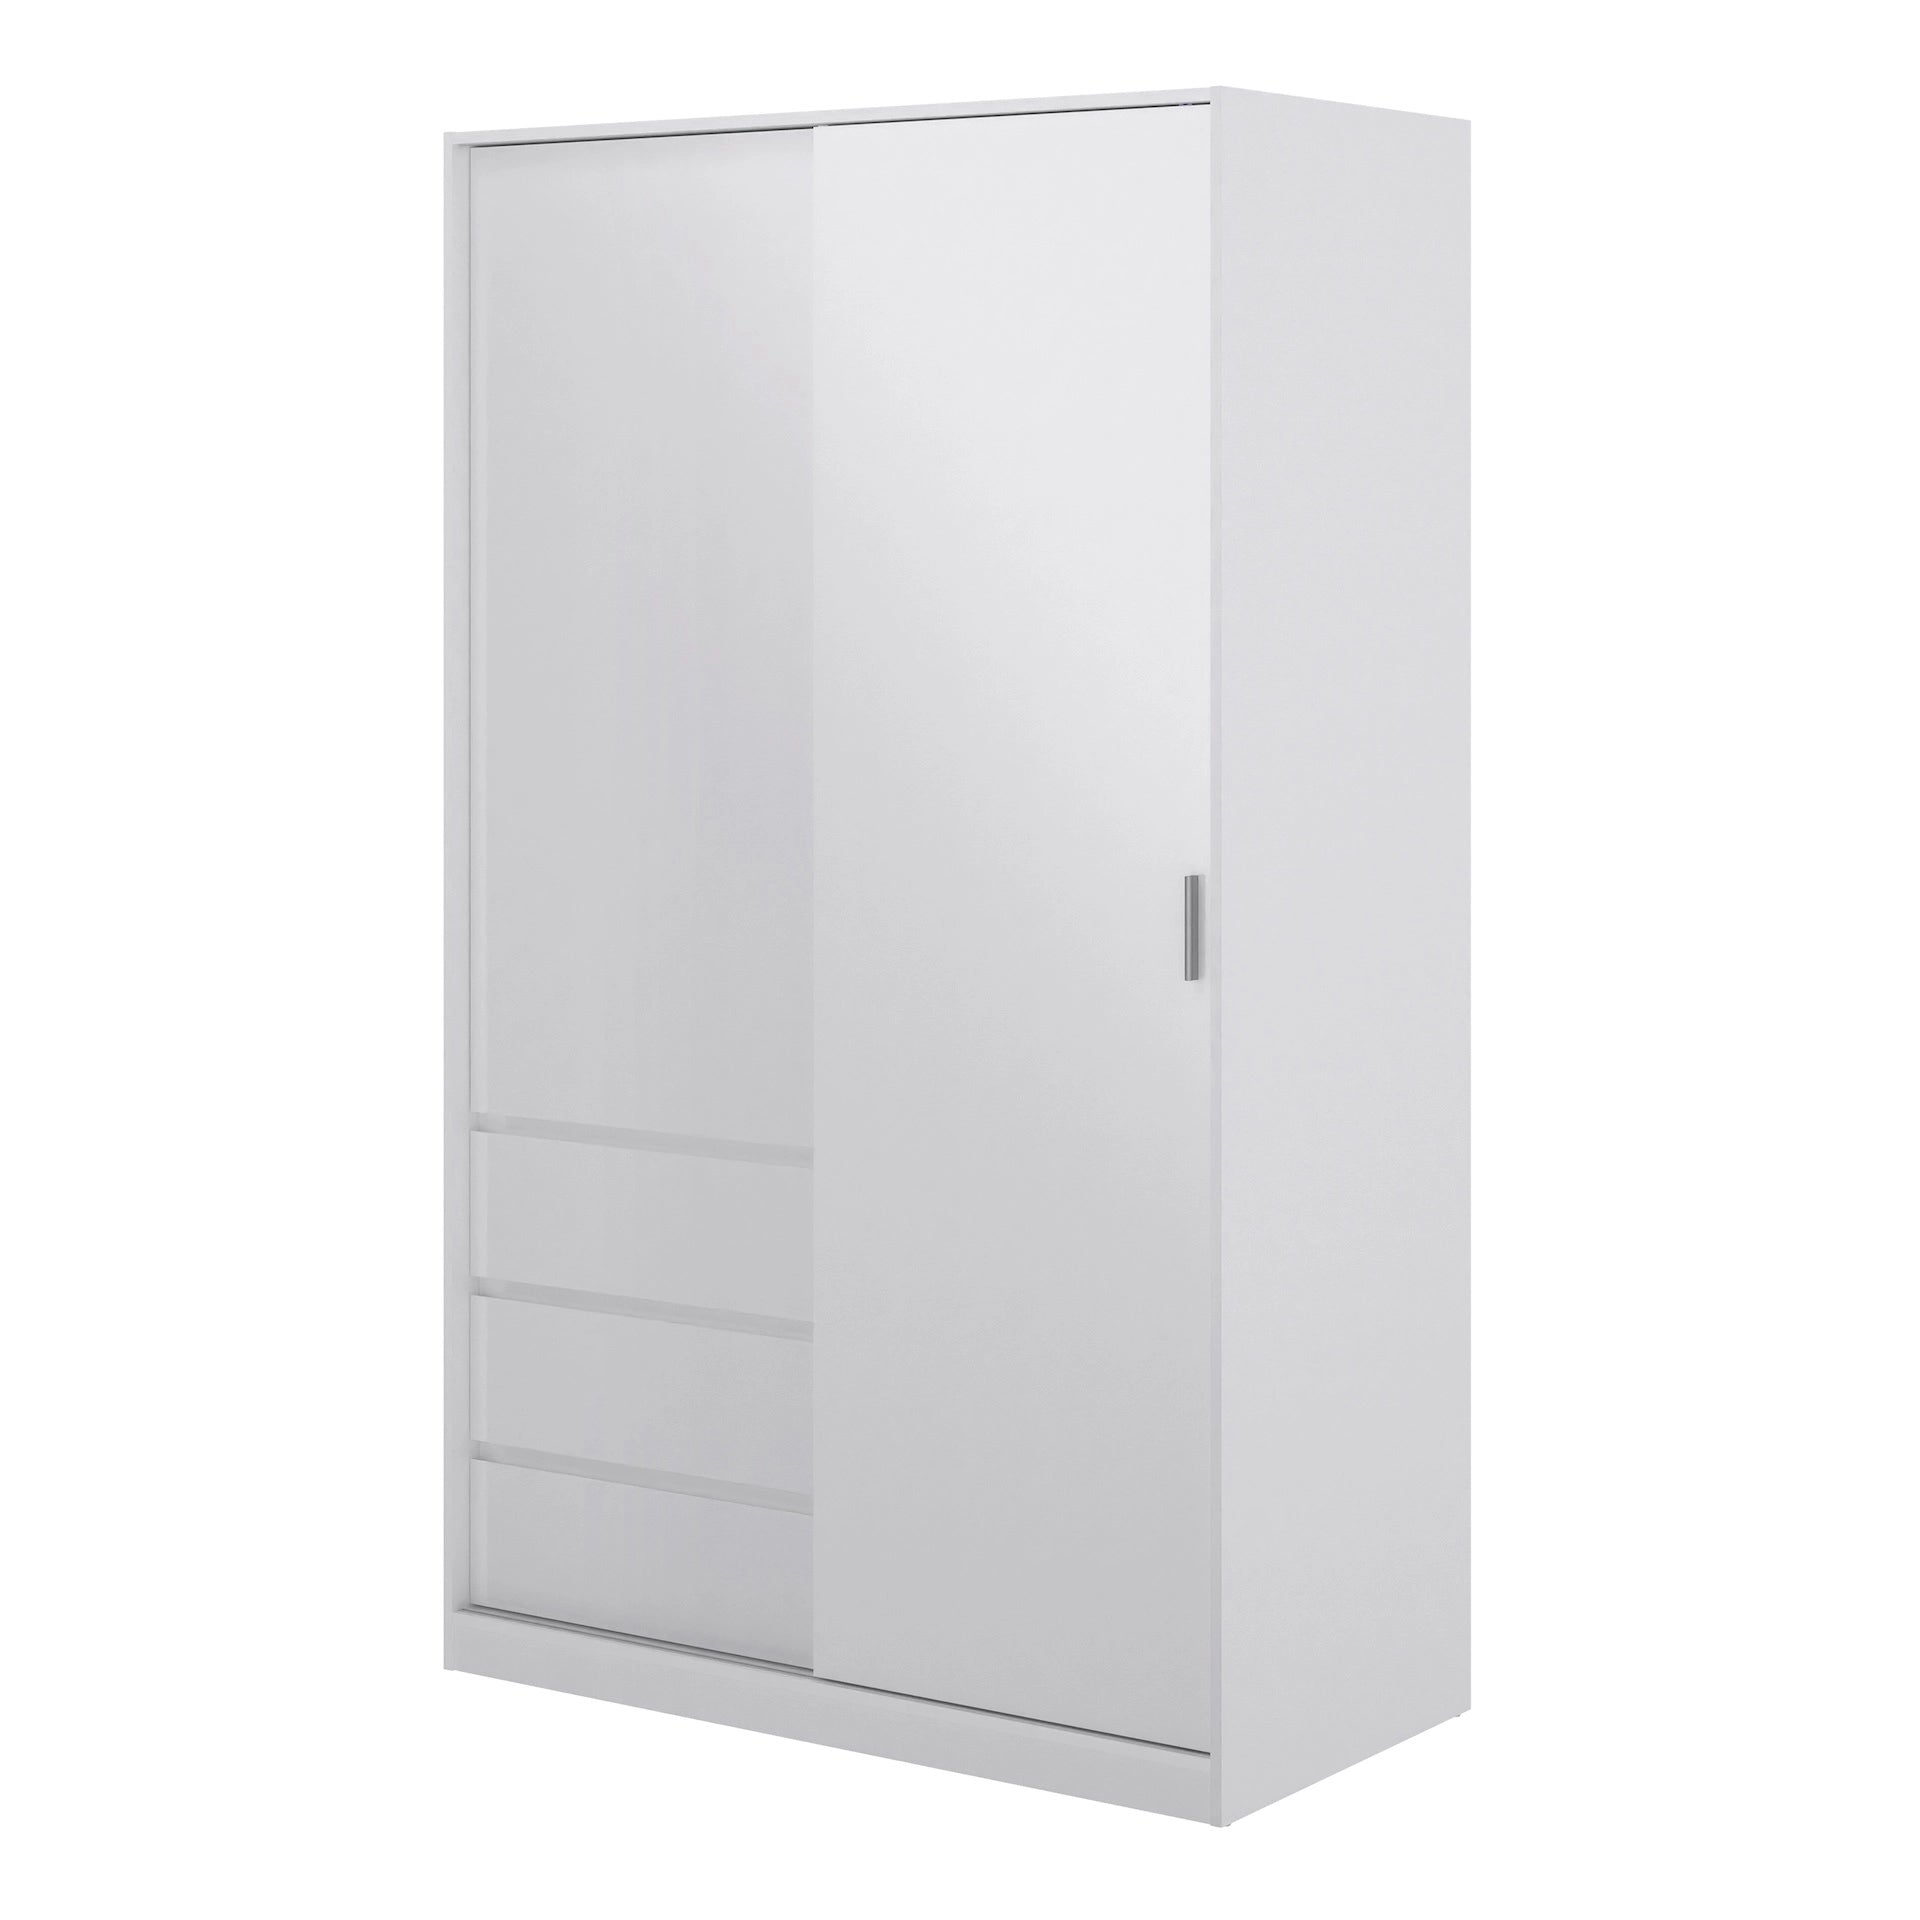 Furniture To Go Naia Wardrobe with 1 Sliding Door + 1 Door + 3 Drawers in White High Gloss